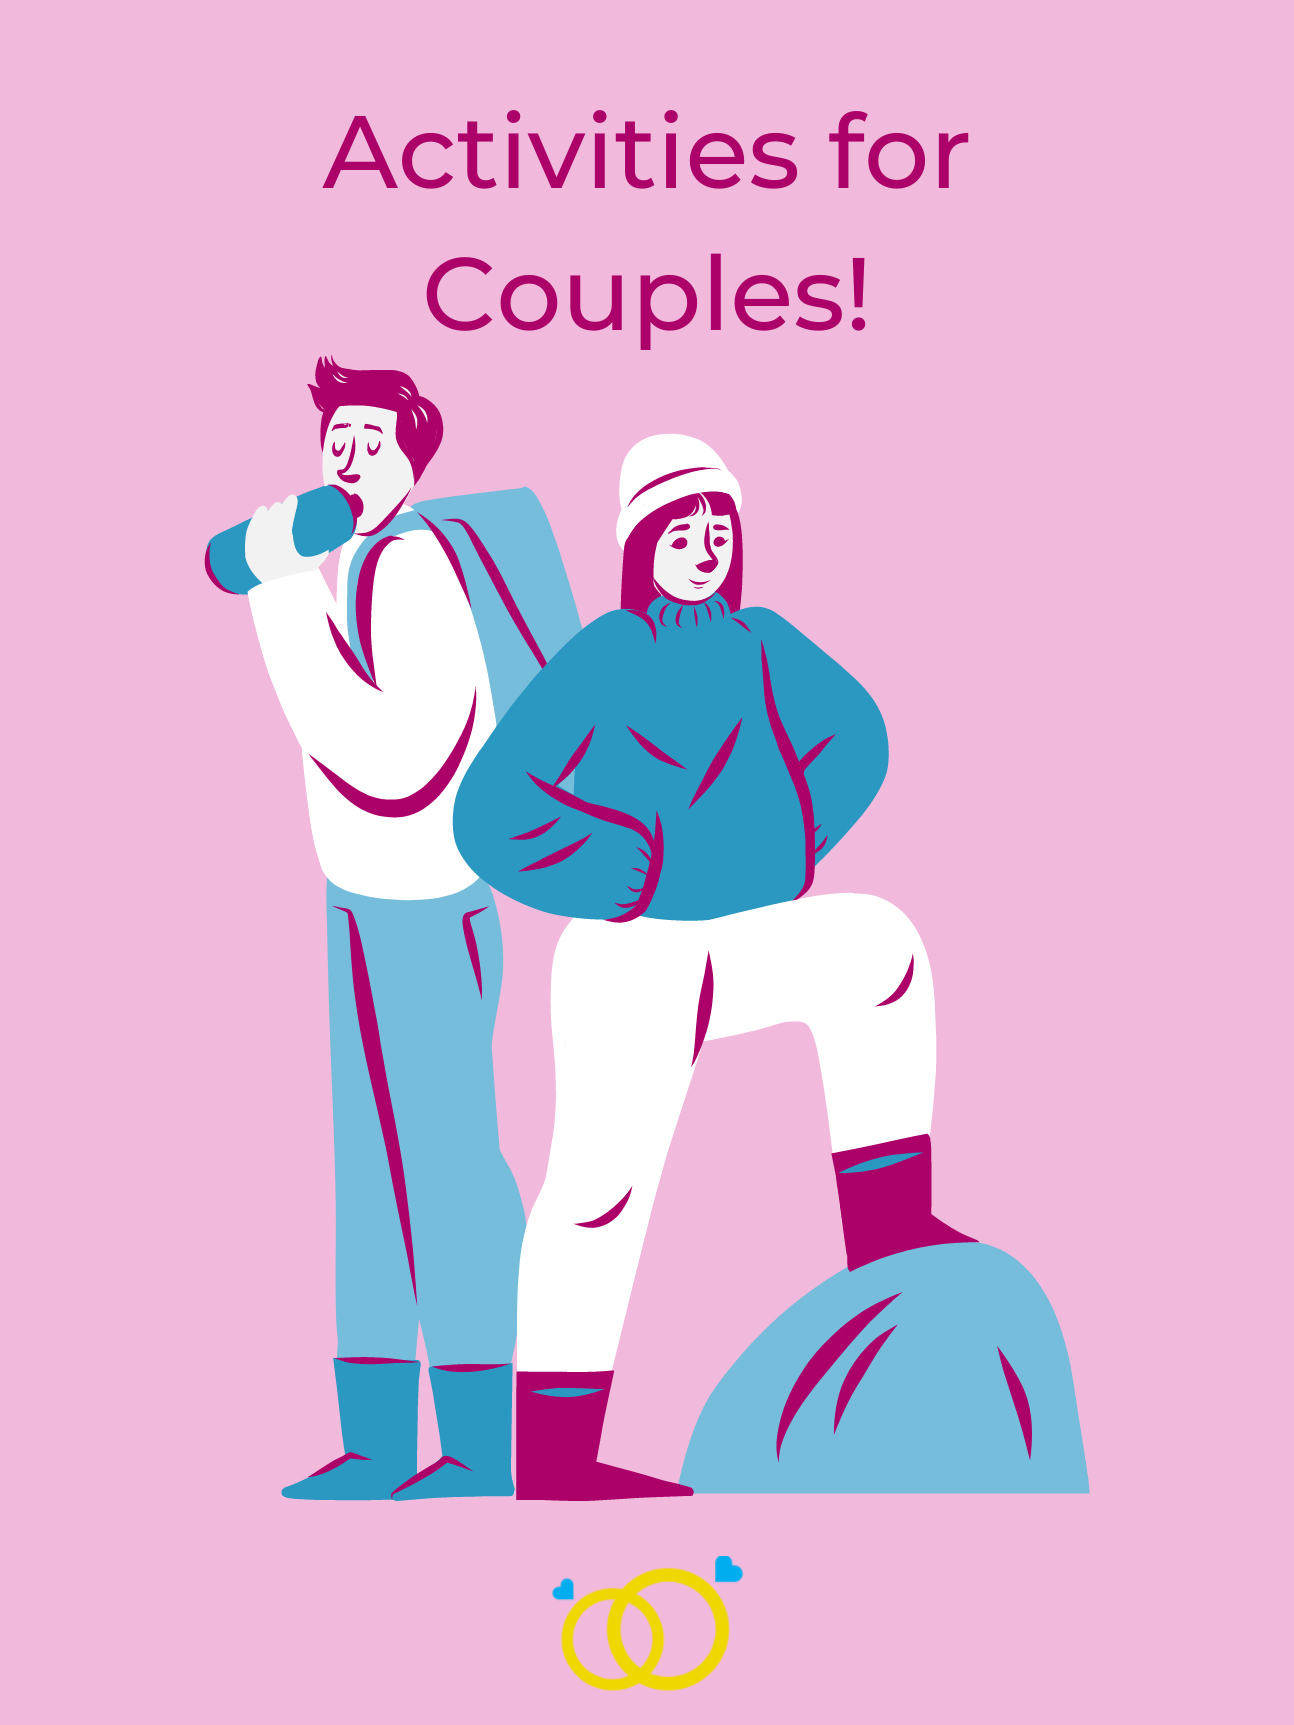 Activities for Couples